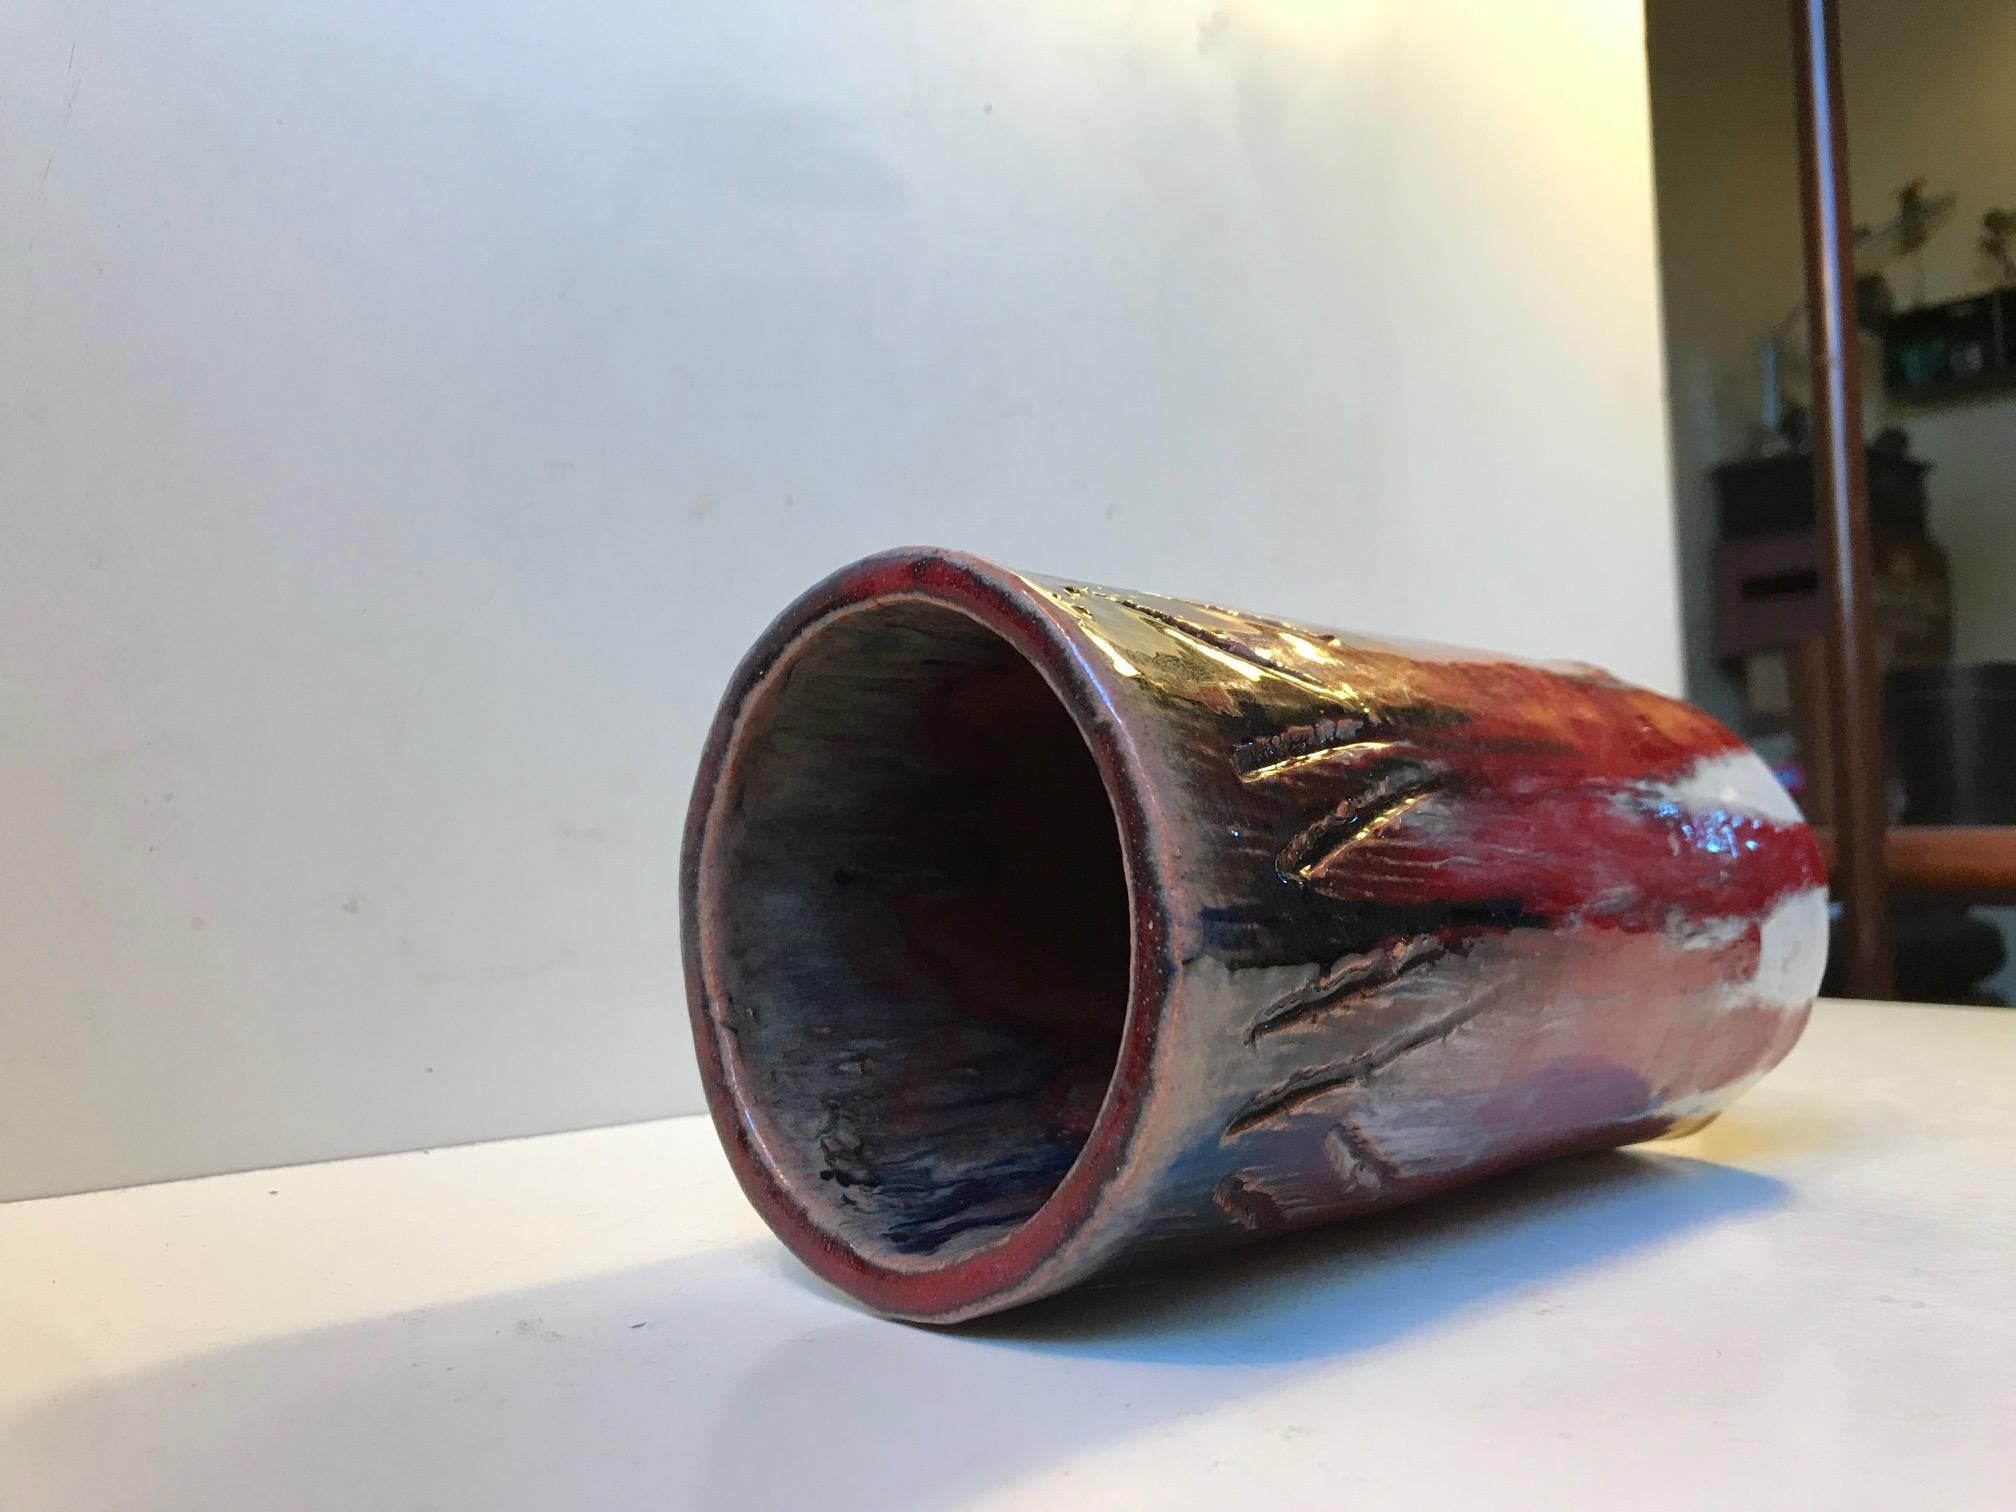 Unique Danish Cylindrical Ceramic Vase in Oxblood and Drip Glaze, 1960s For Sale 1